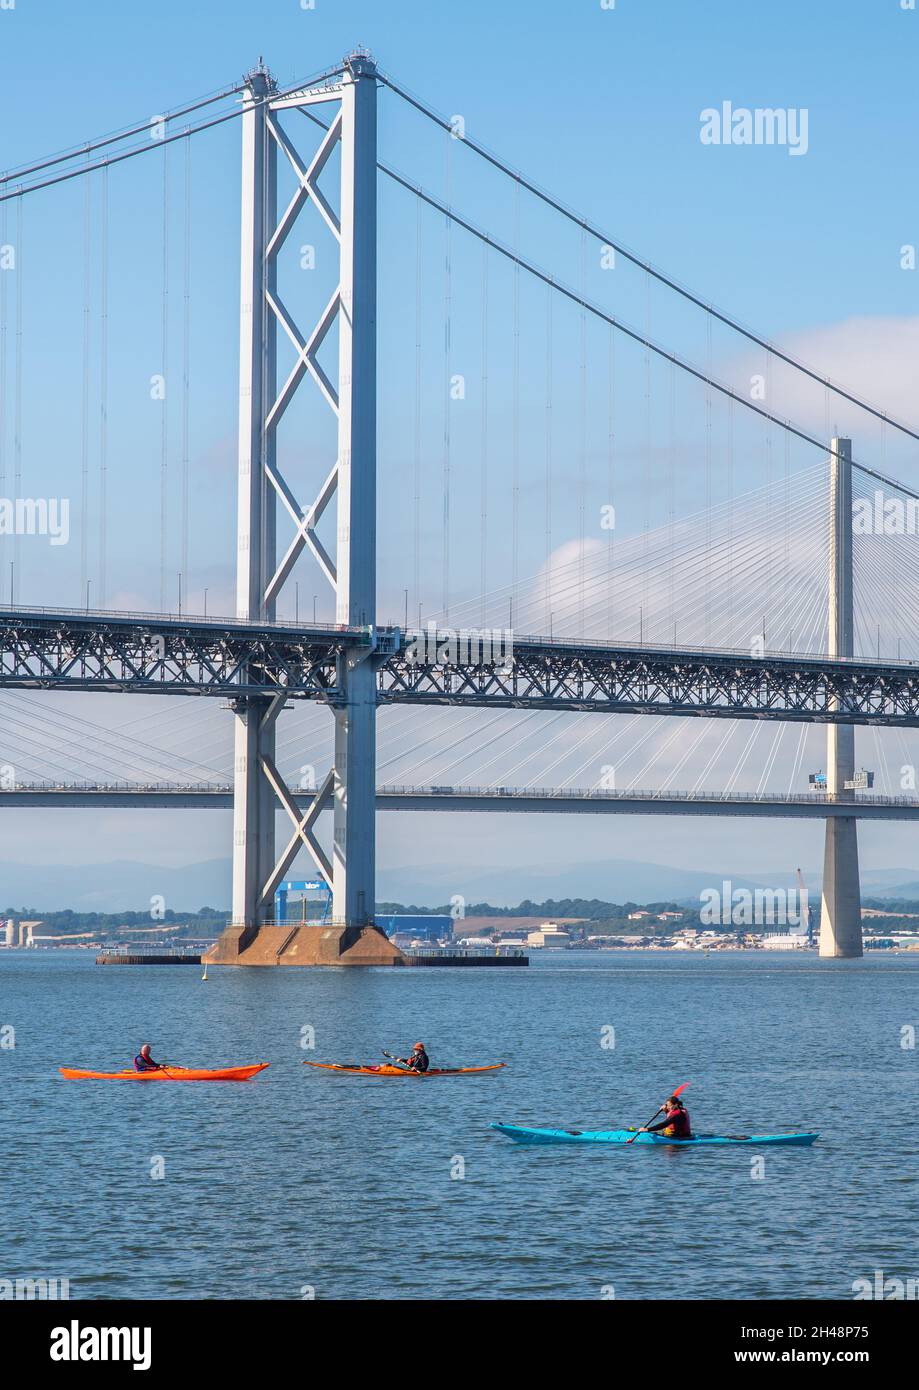 South Queensferry, Edinburgh, Scotland 7th September 2021 - Three  Kayaks passing under the Forth Road Bridges on a sunny day with clear sky. Stock Photo